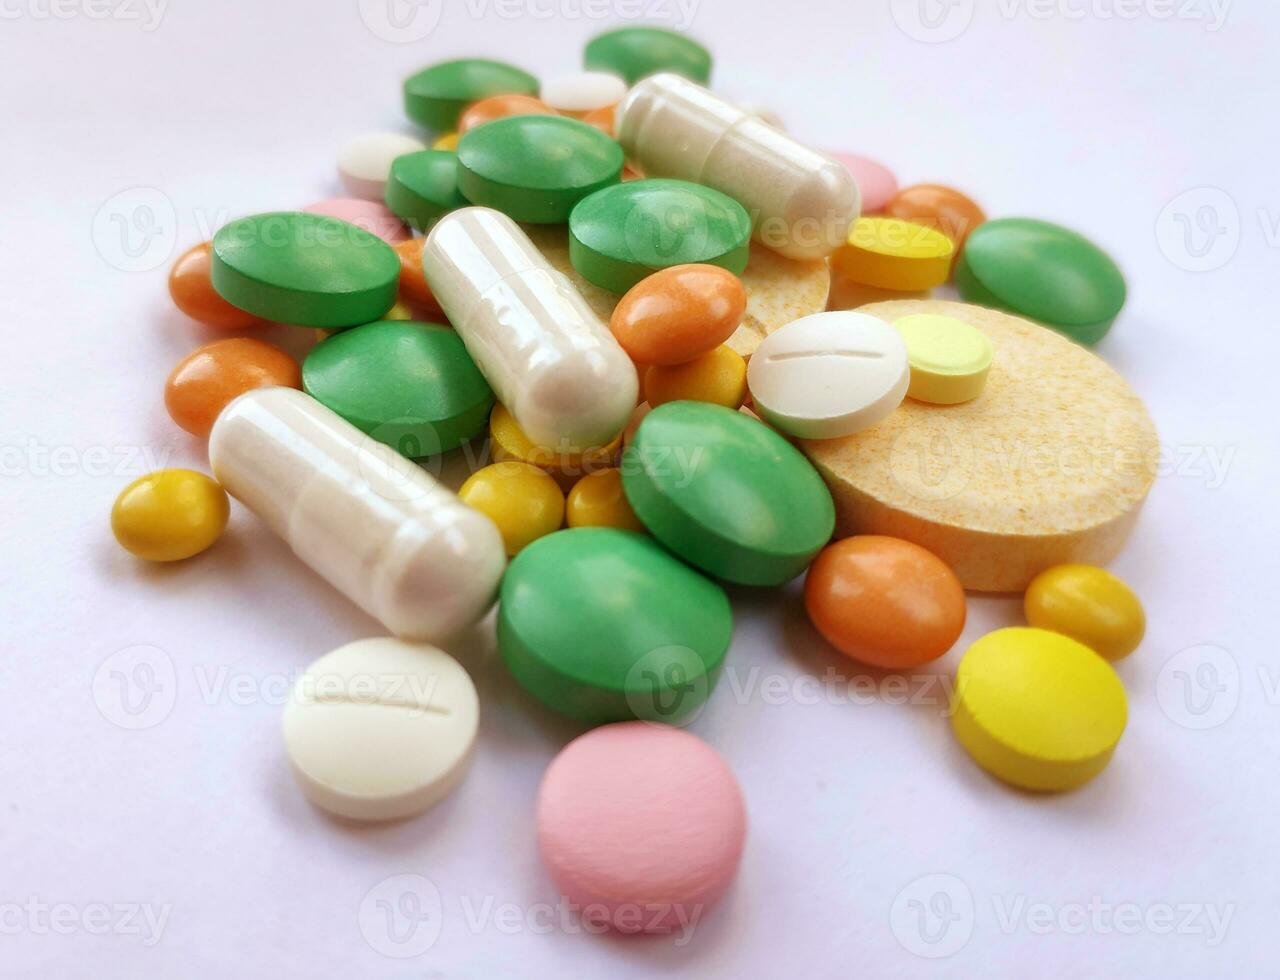 Stack of colourful pills, medicine background photo